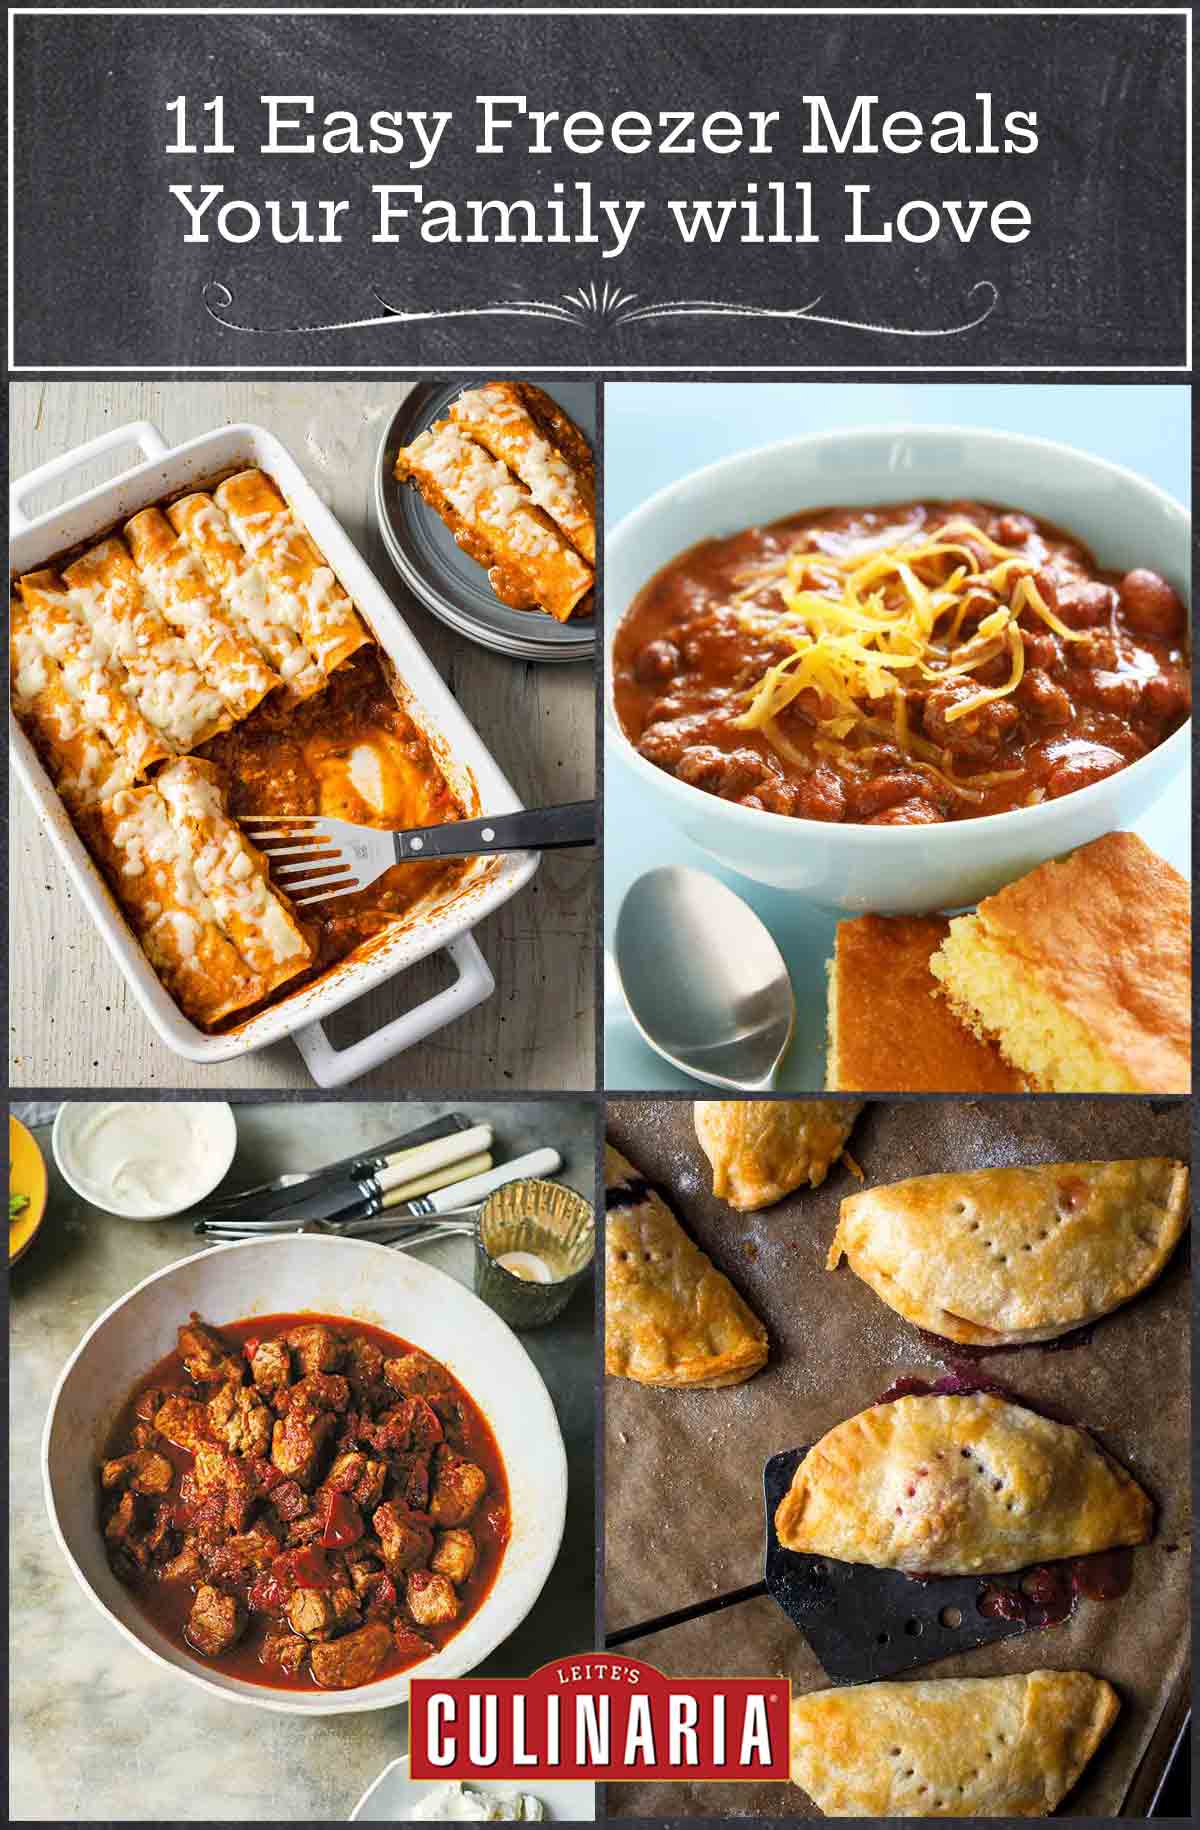 A dish of chicken enchiladas, a bowl of chili topped with cheese, a bowl of pork tinga, and three fruit-filled hand pies on a baking sheet.